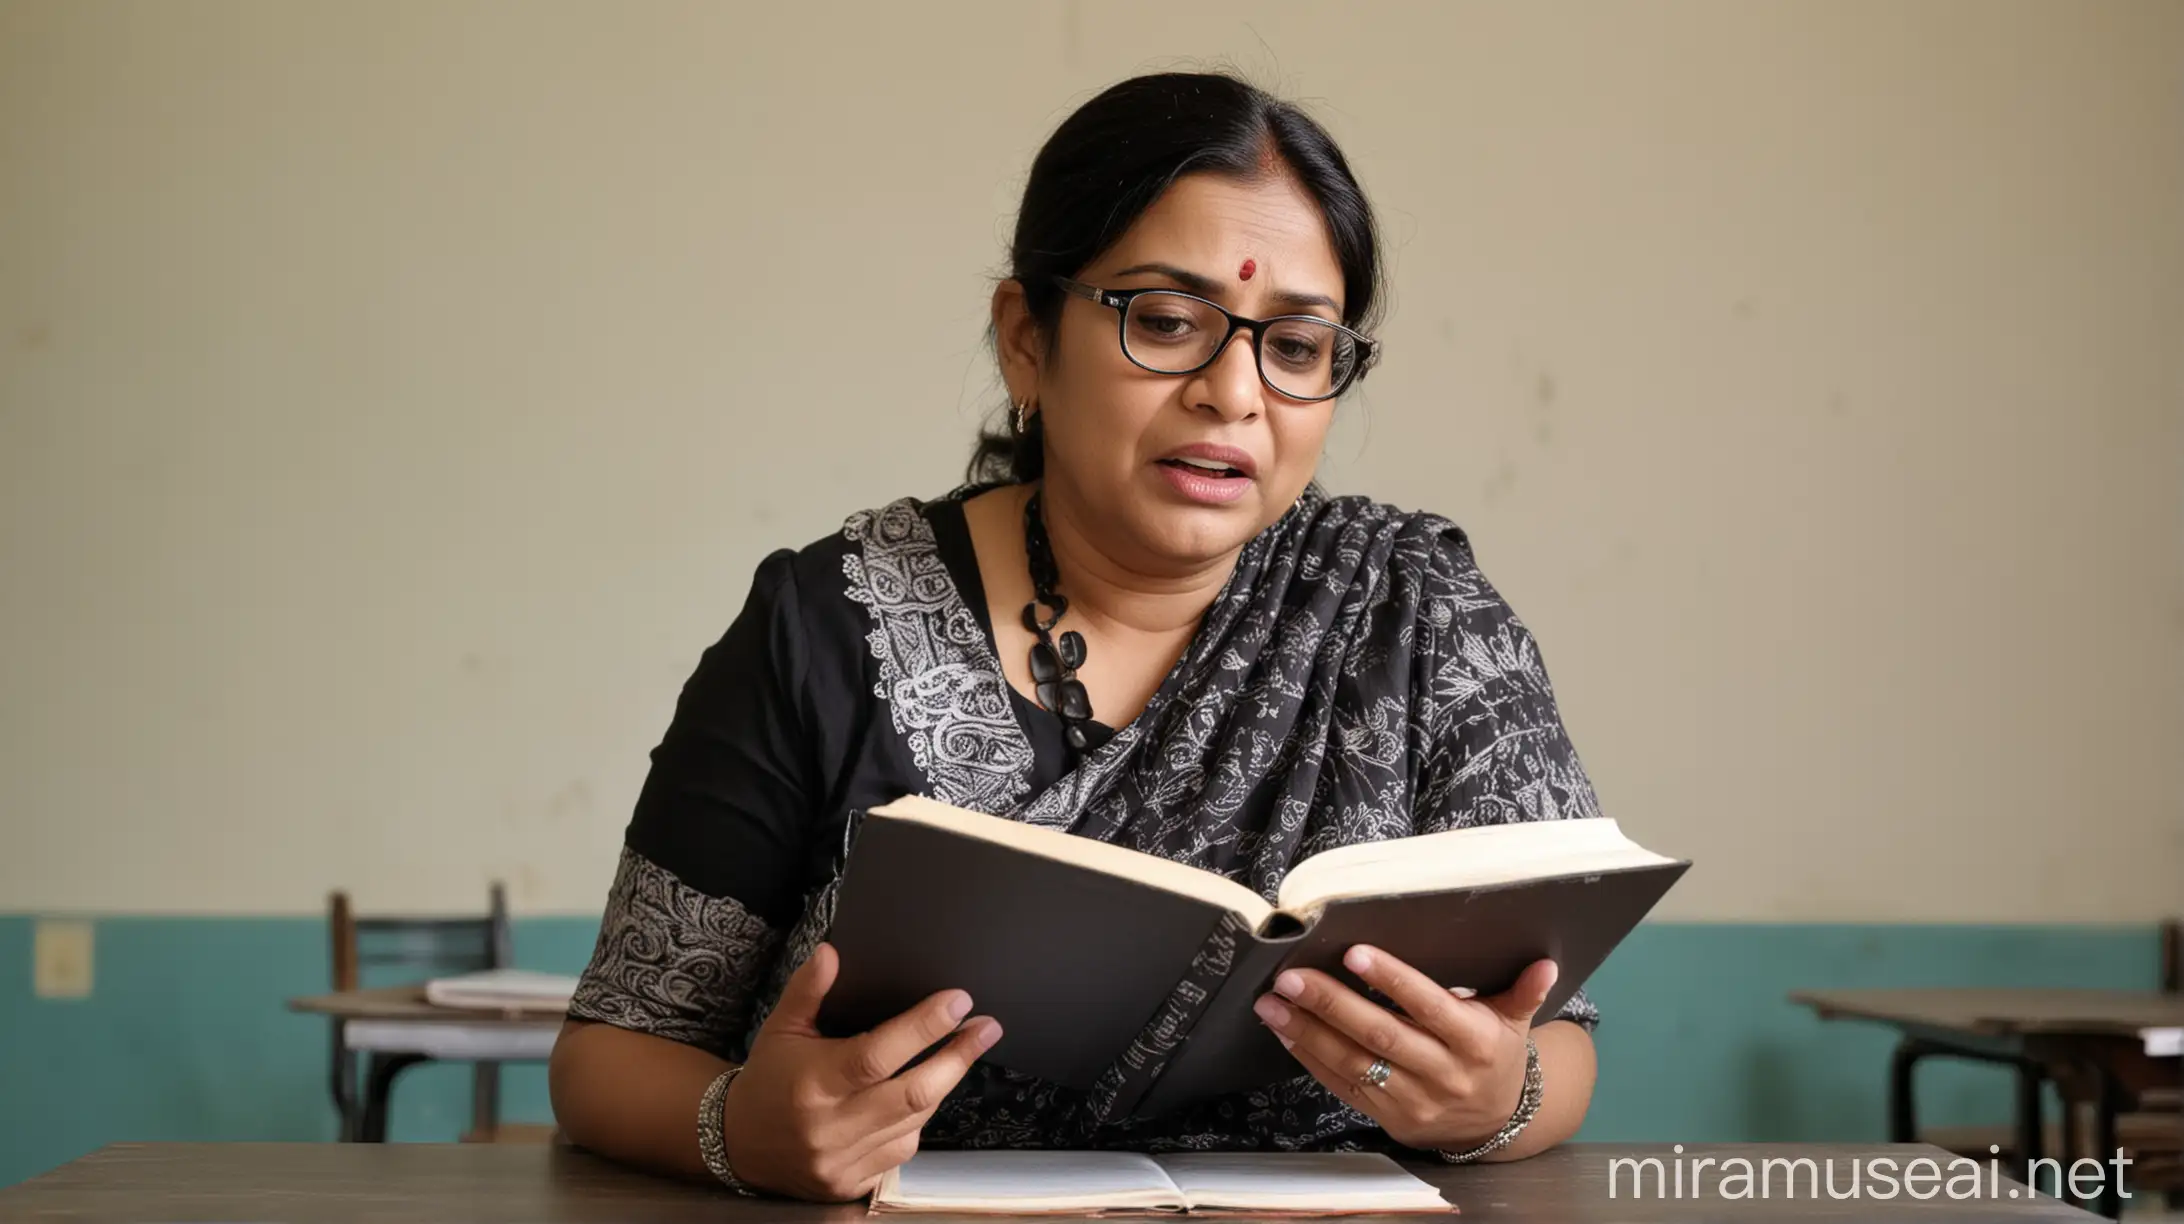 Angry Indian Mother 47 Fat Holds Book in Classroom